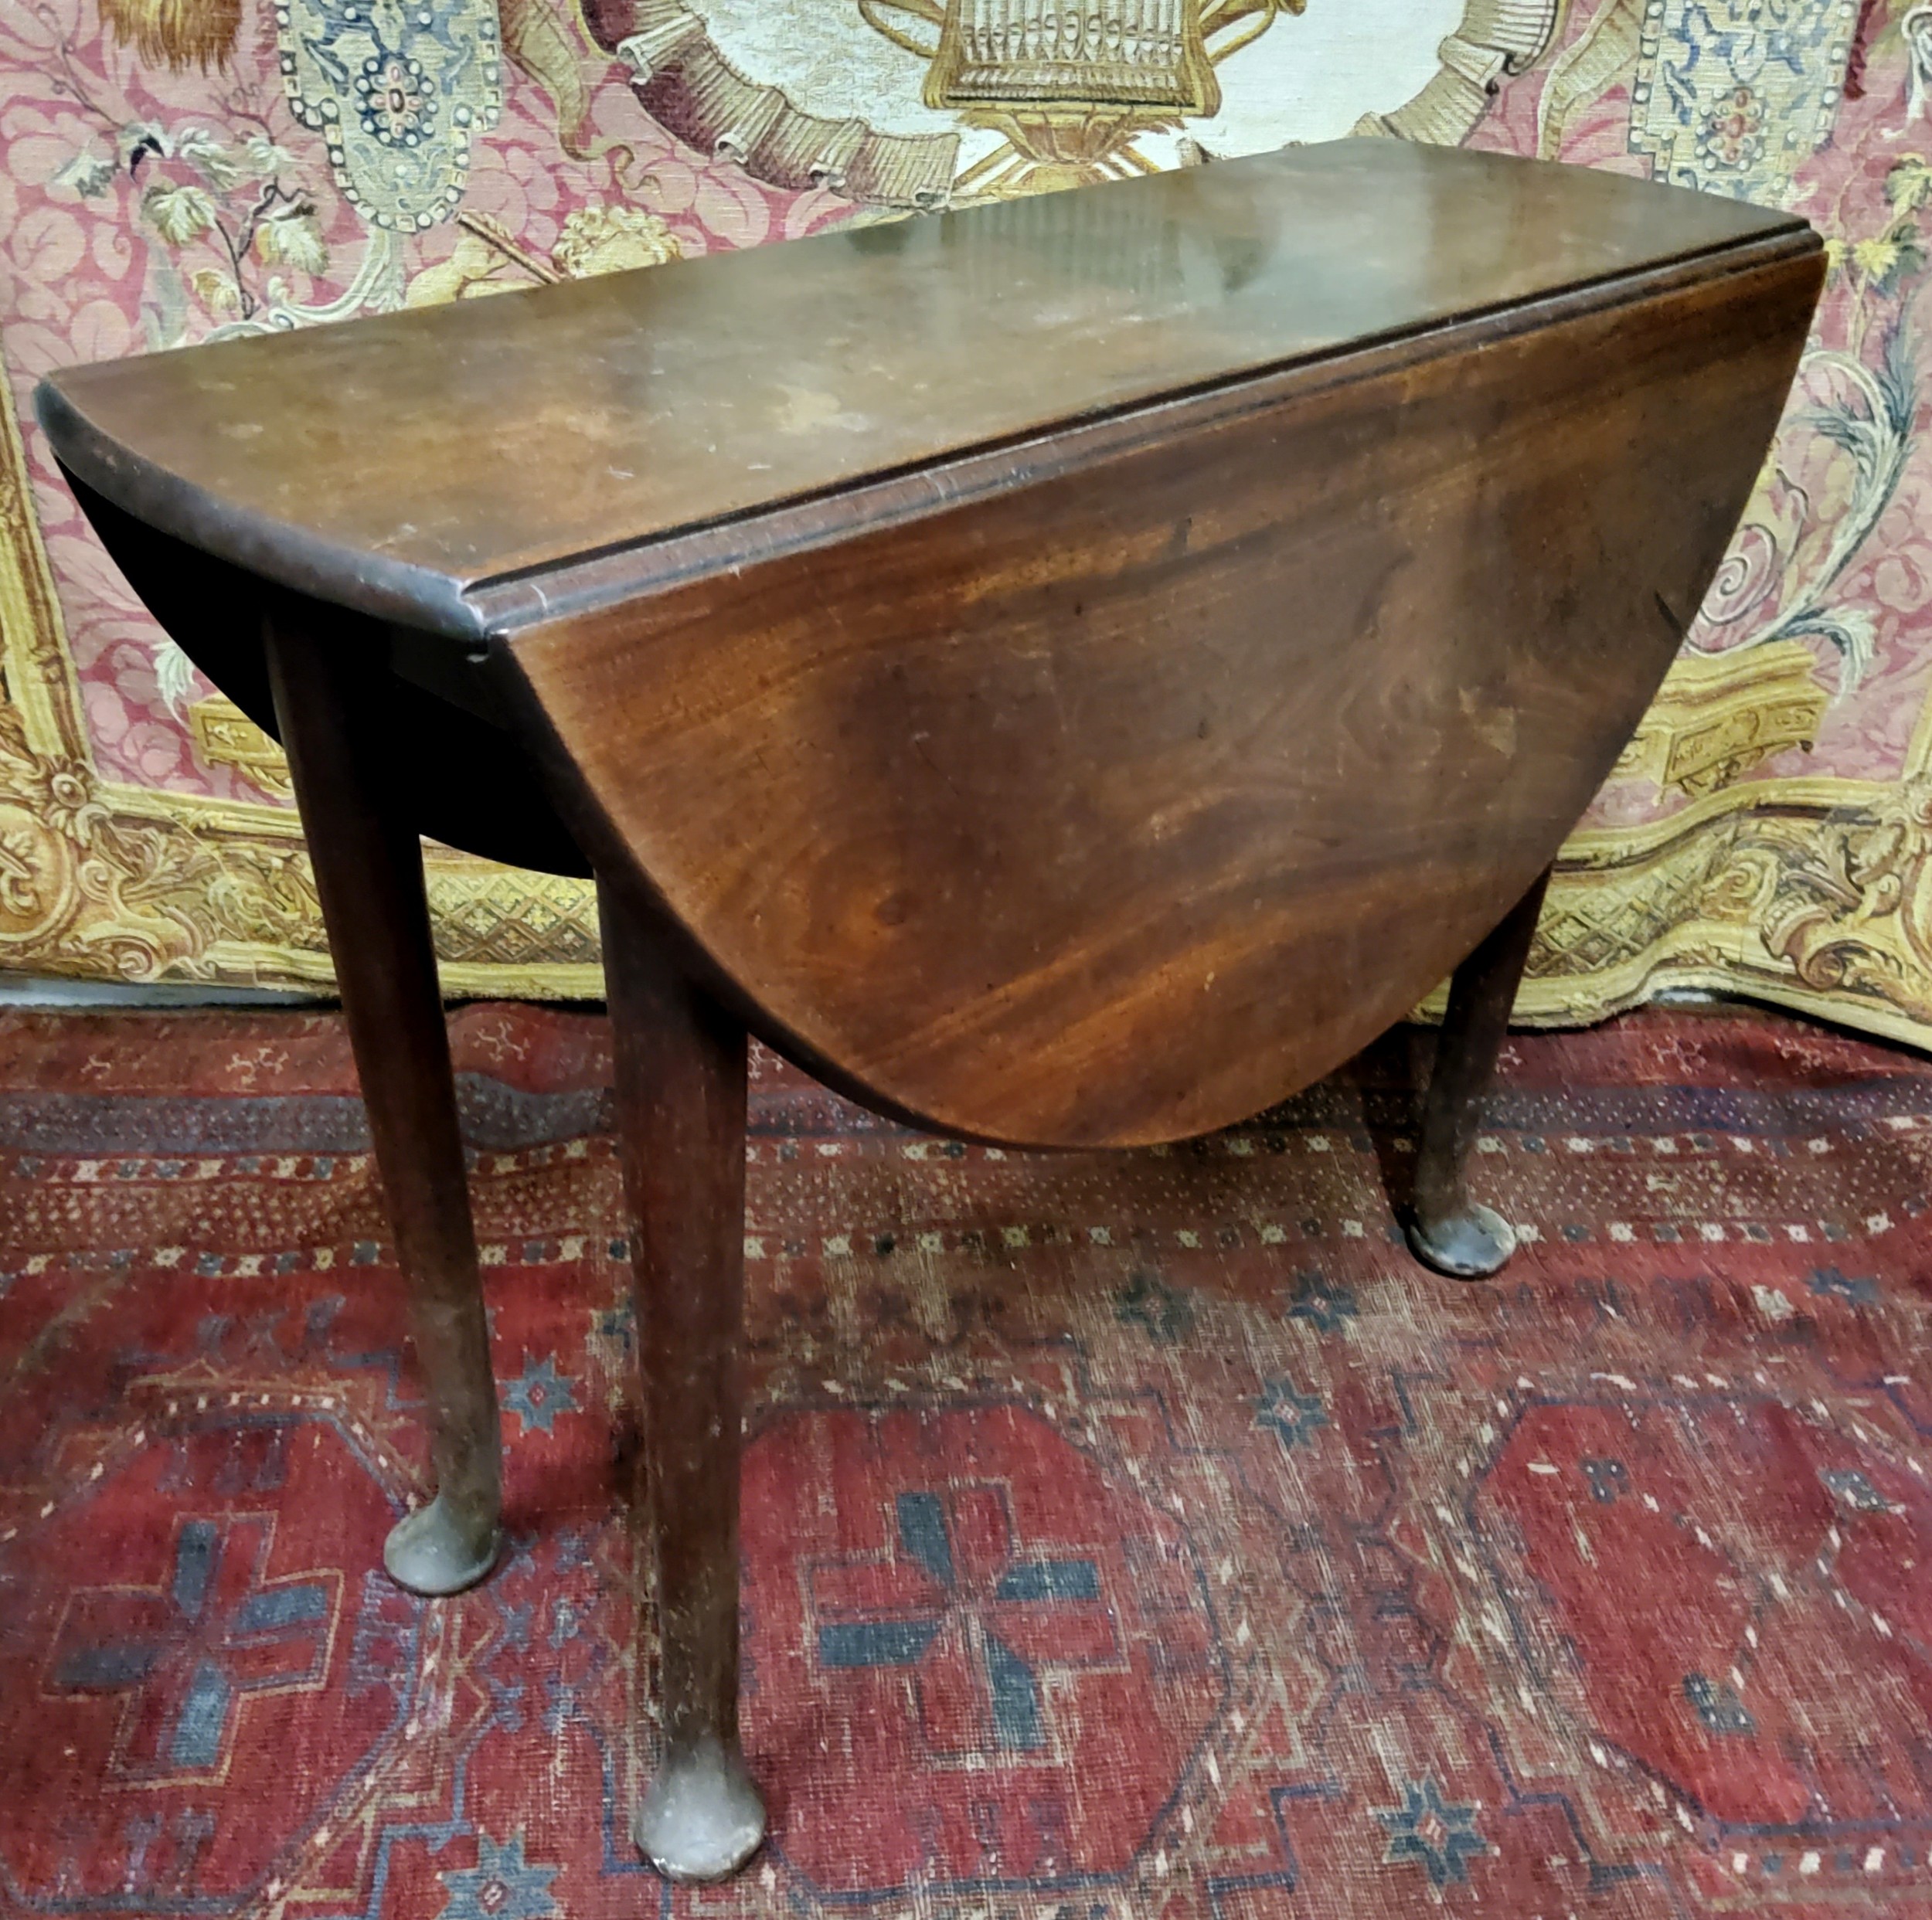 A George II mahogany gateleg table, oval top with fall leaves, tapered legs, pad feet, 71.5cm